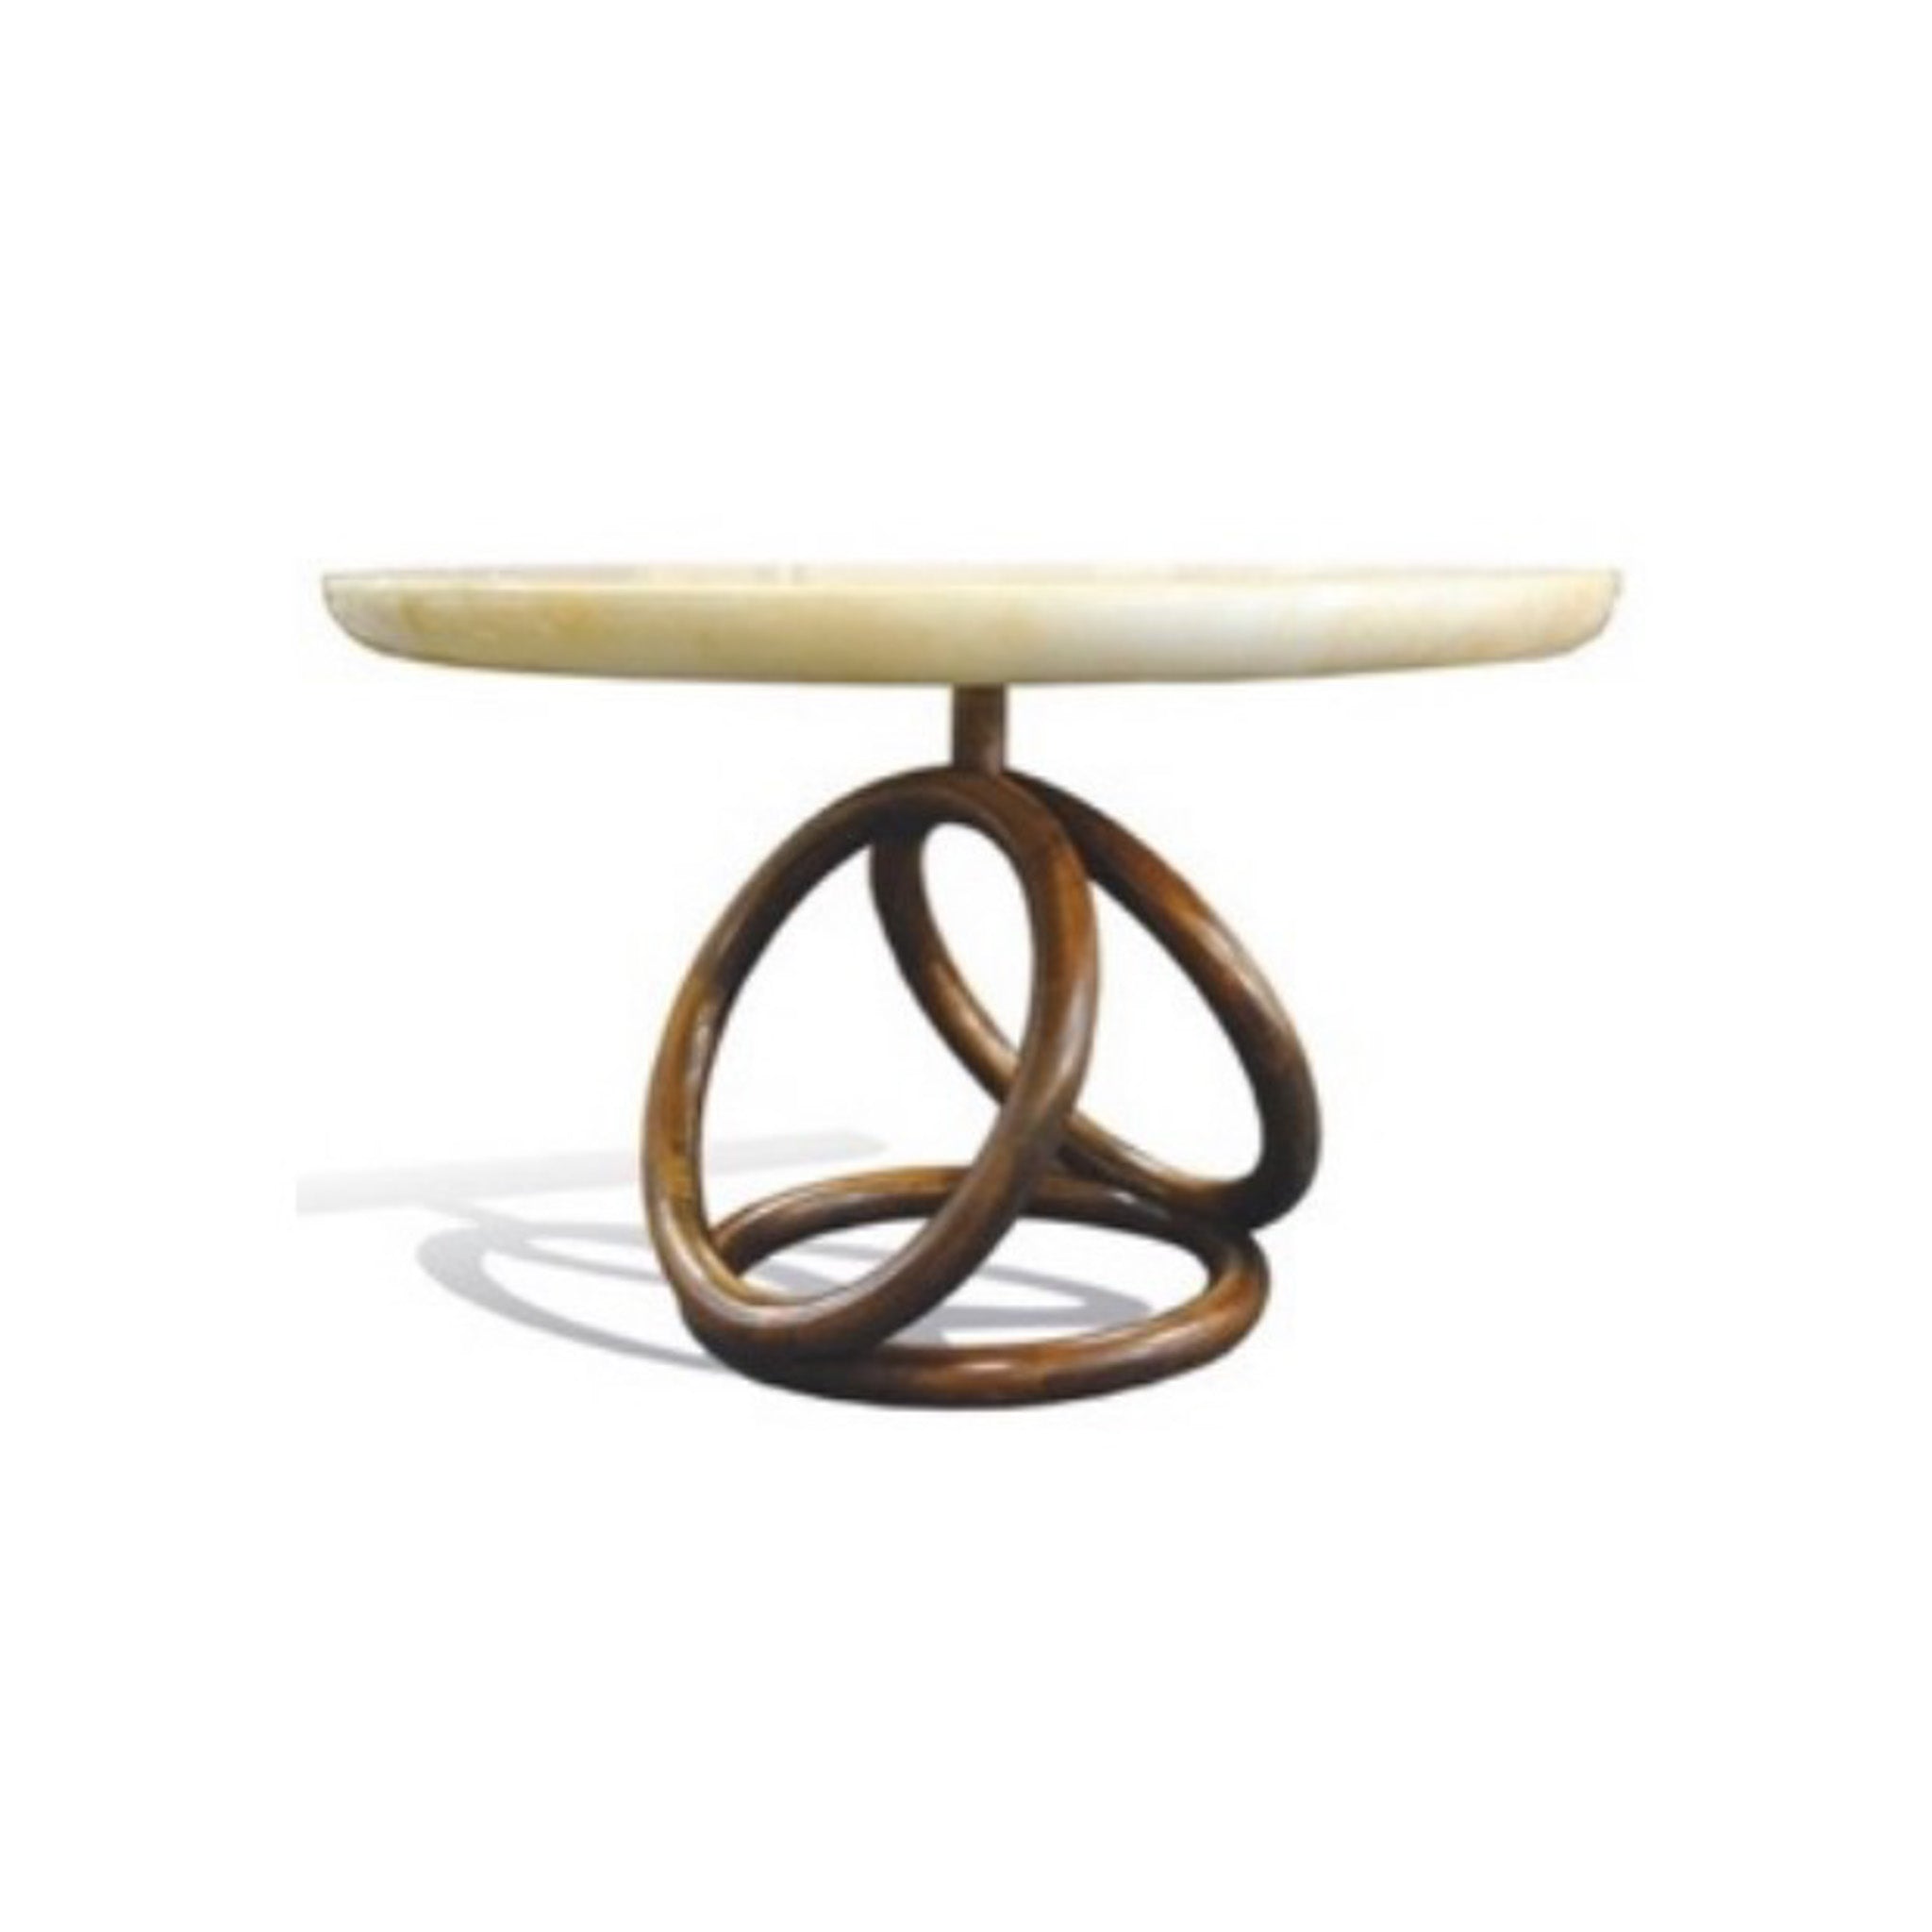 Three Ring Dining Table